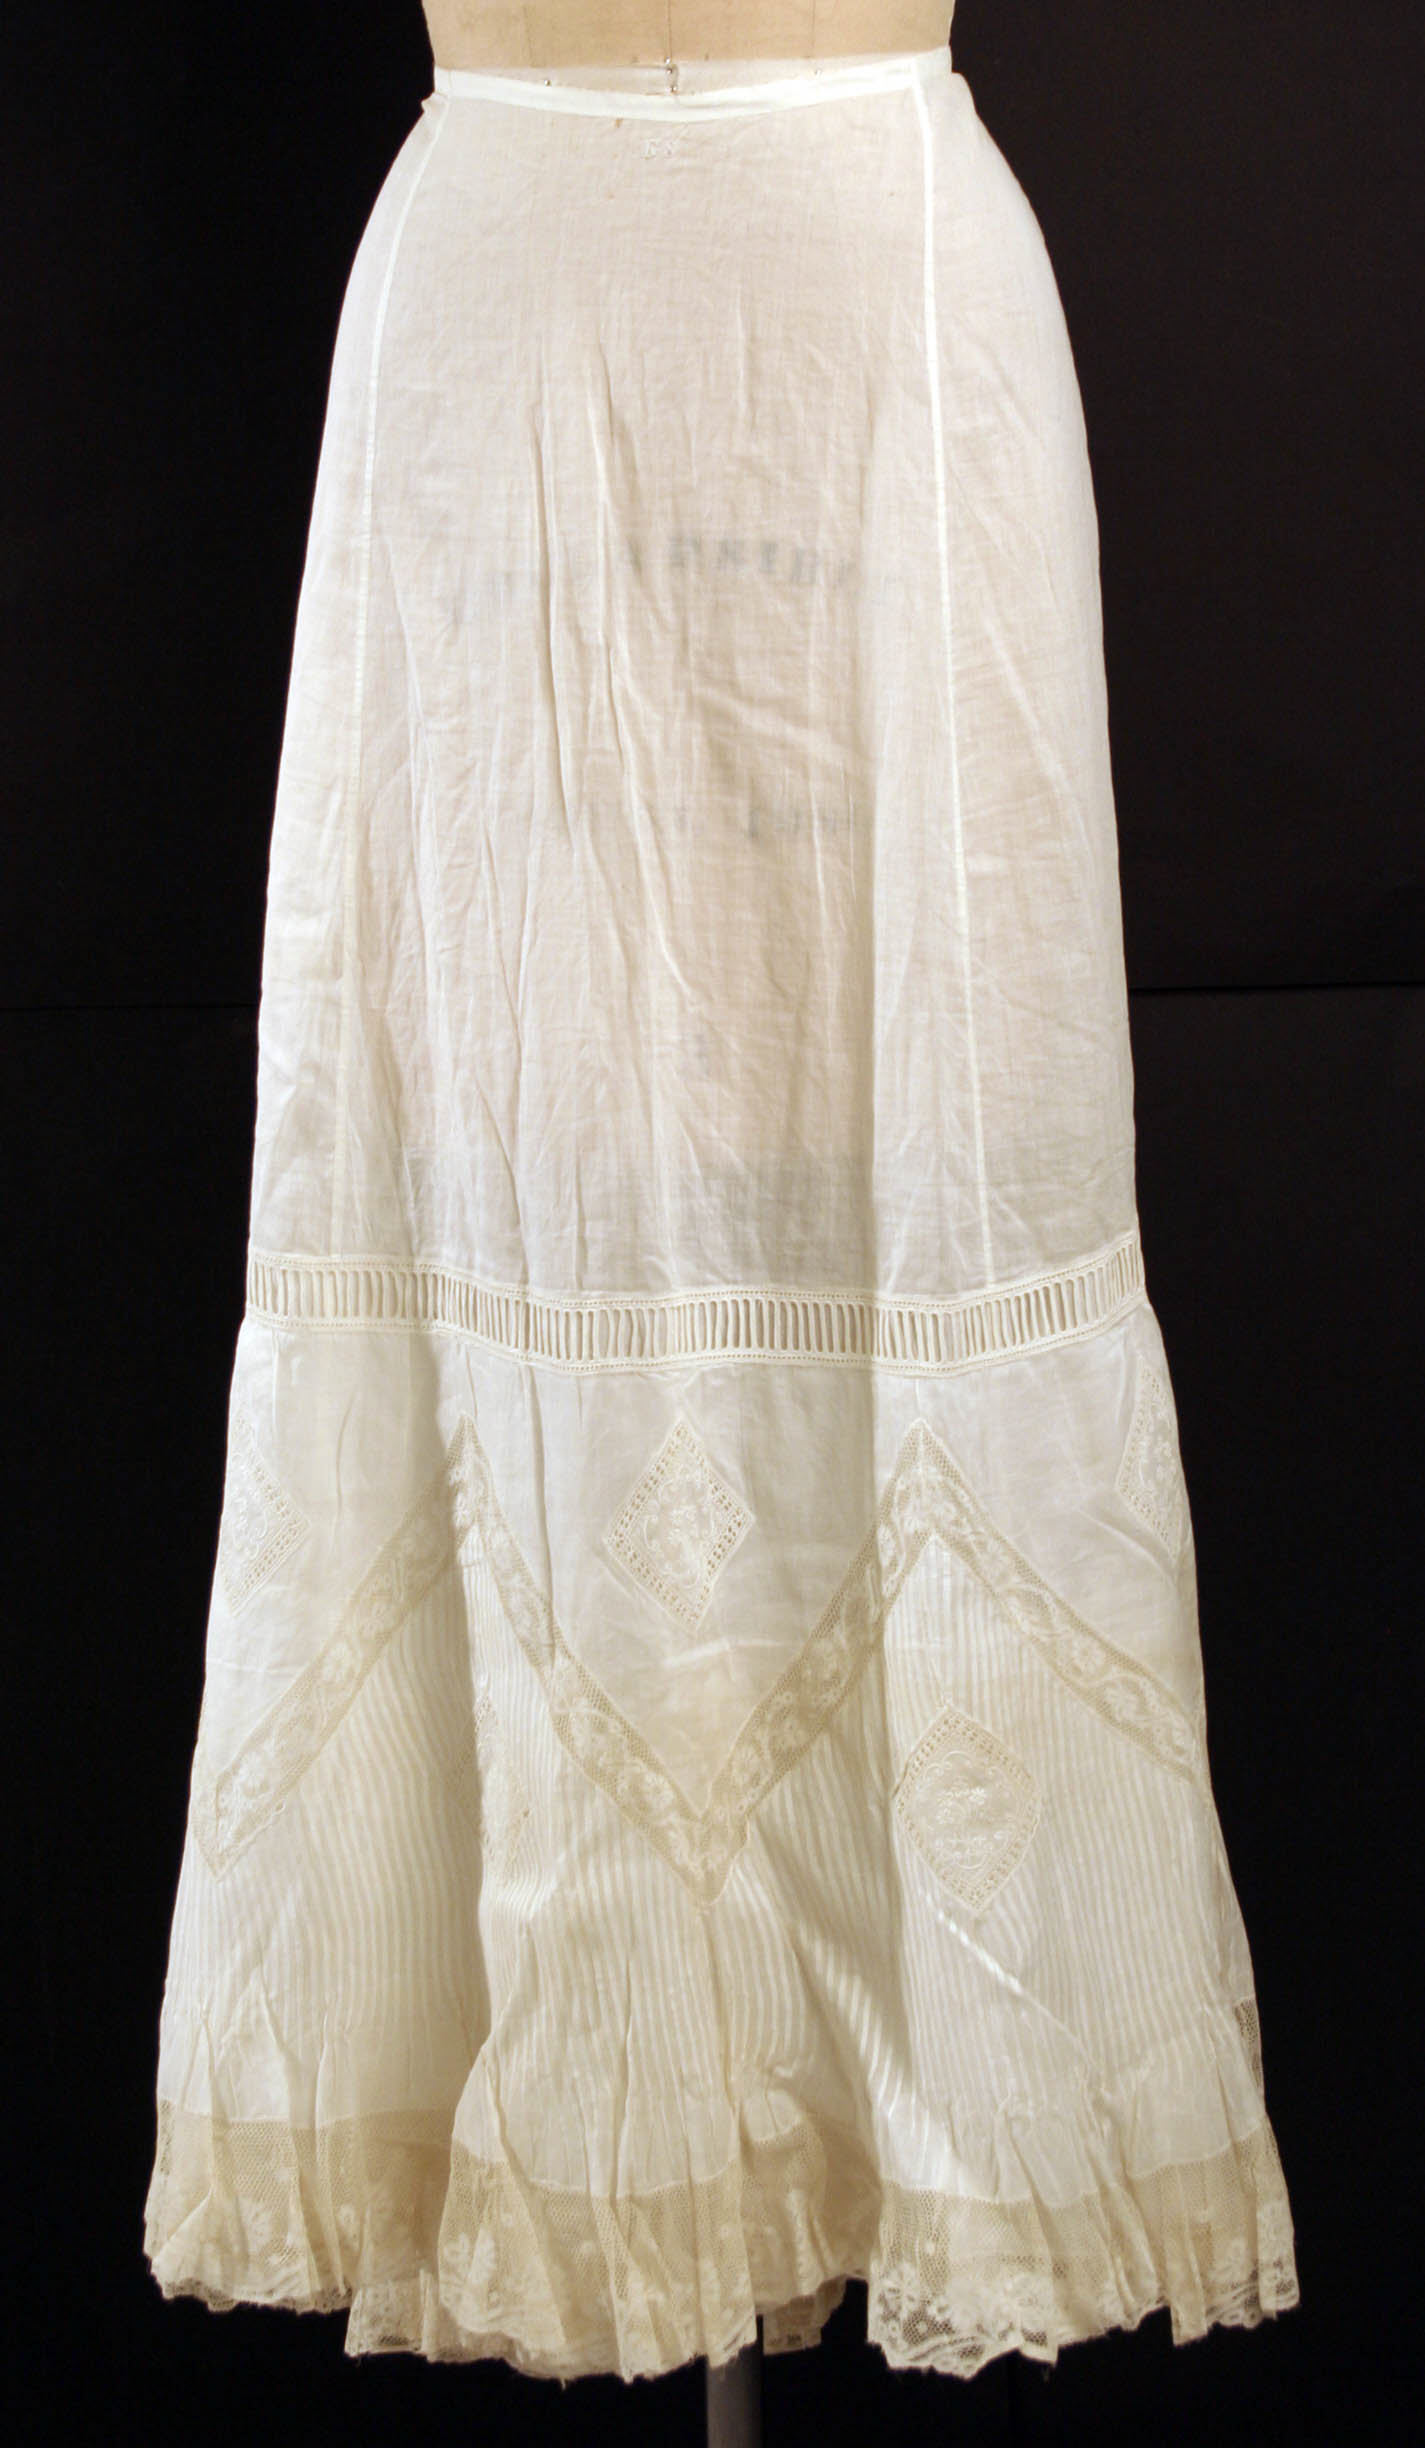 Petticoat | probably French | The Metropolitan Museum of Art